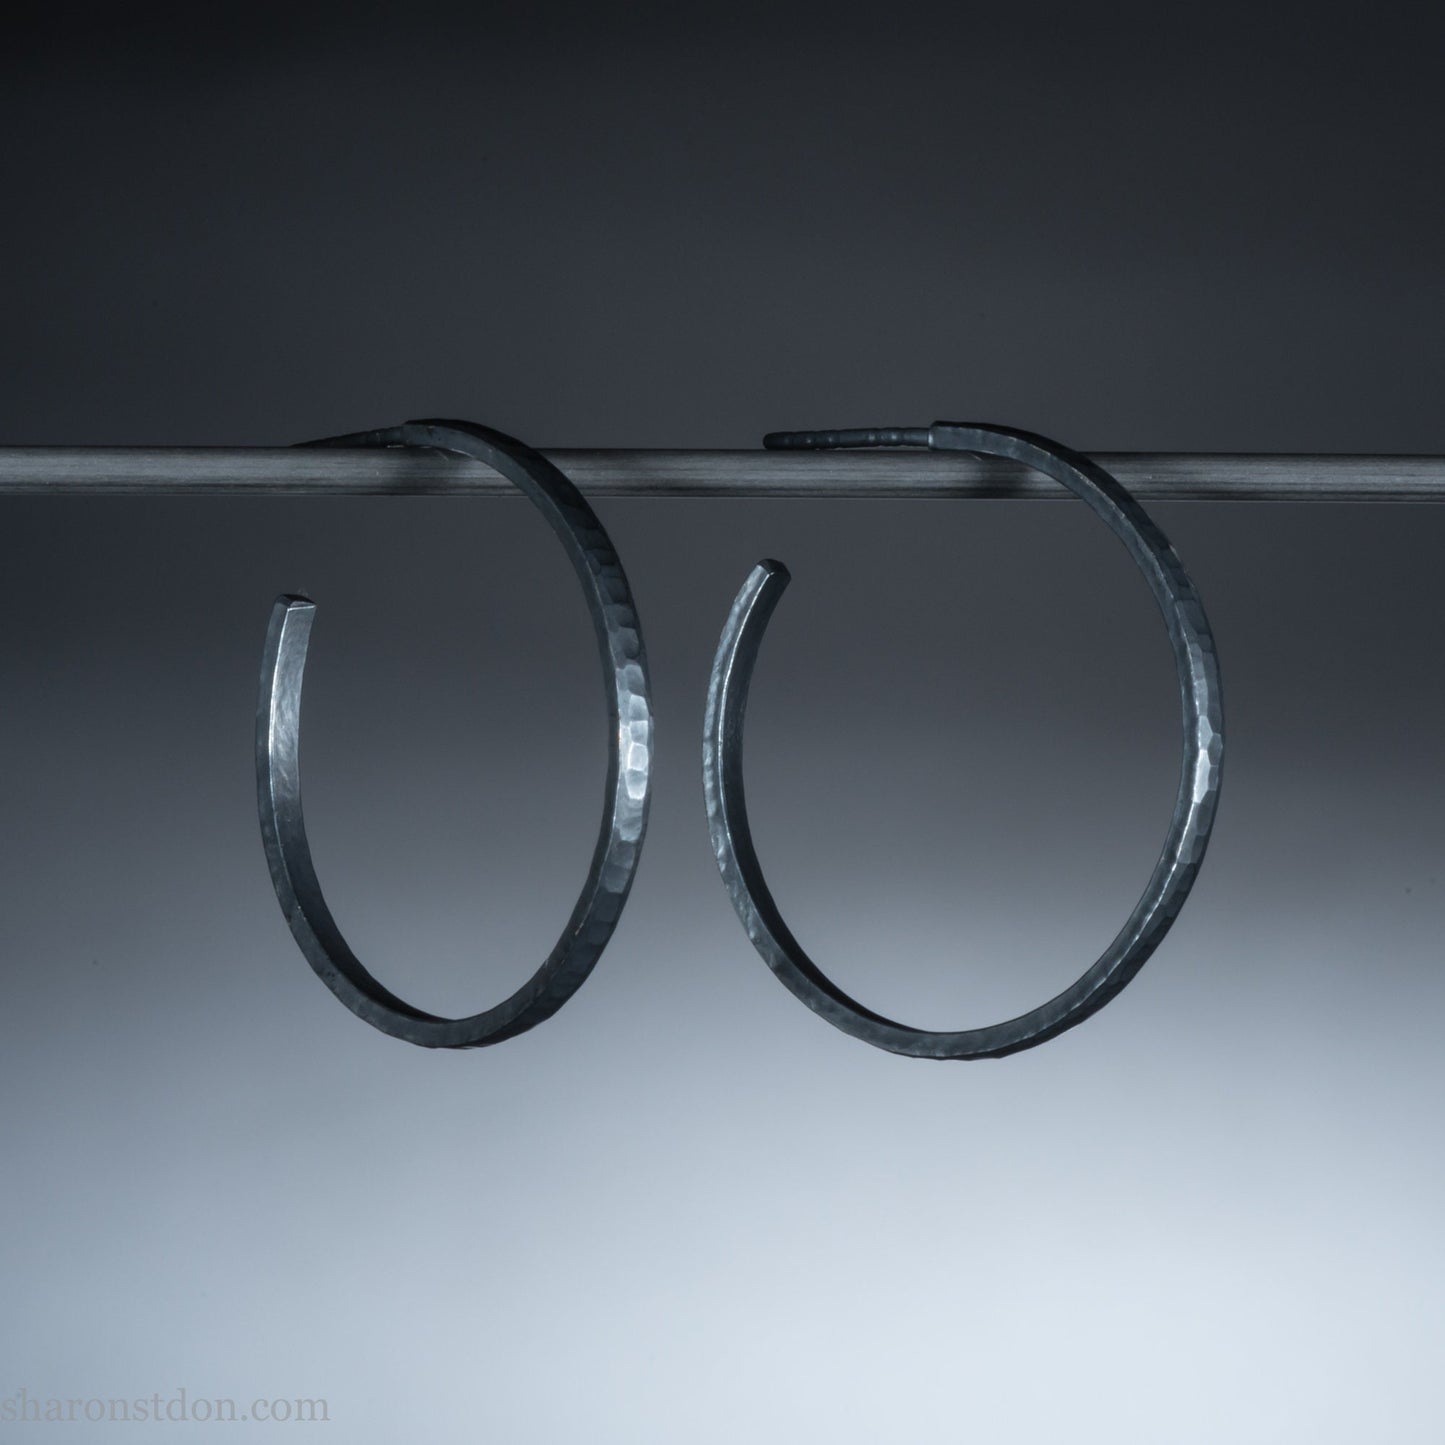 25mm x 2mm Oxidized black 925 sterling silver hoop earrings for women. Hammered solid silver hoops, handmade by Sharon SaintDon in North America.